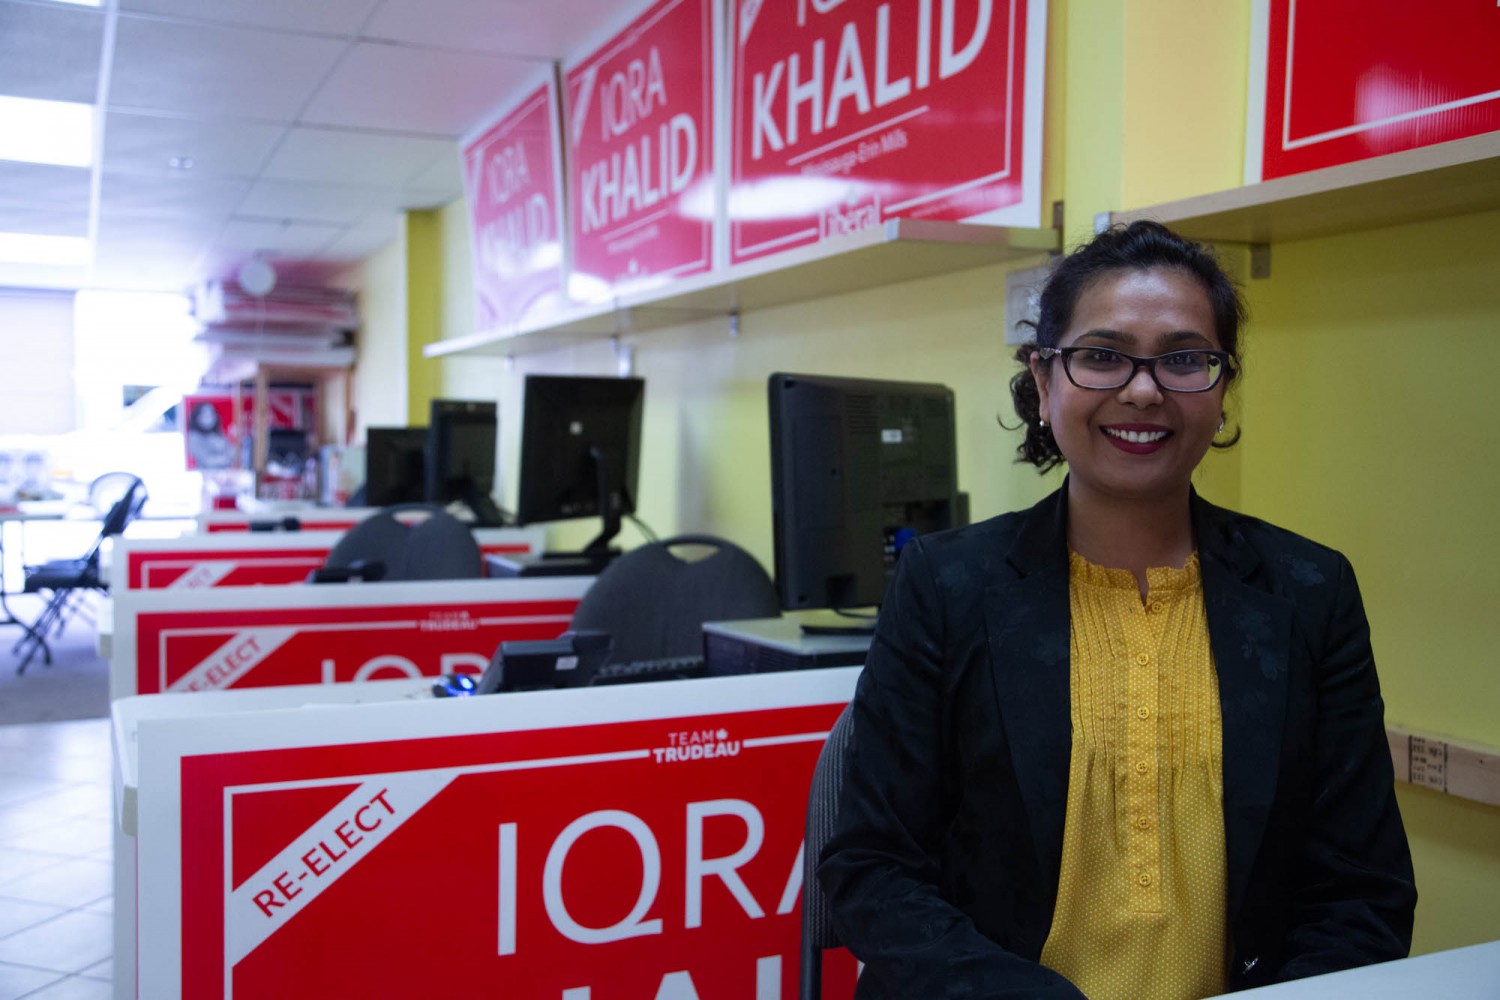 Death threats made Parliament no easy job for Iqra Khalid, but she’s ready for more